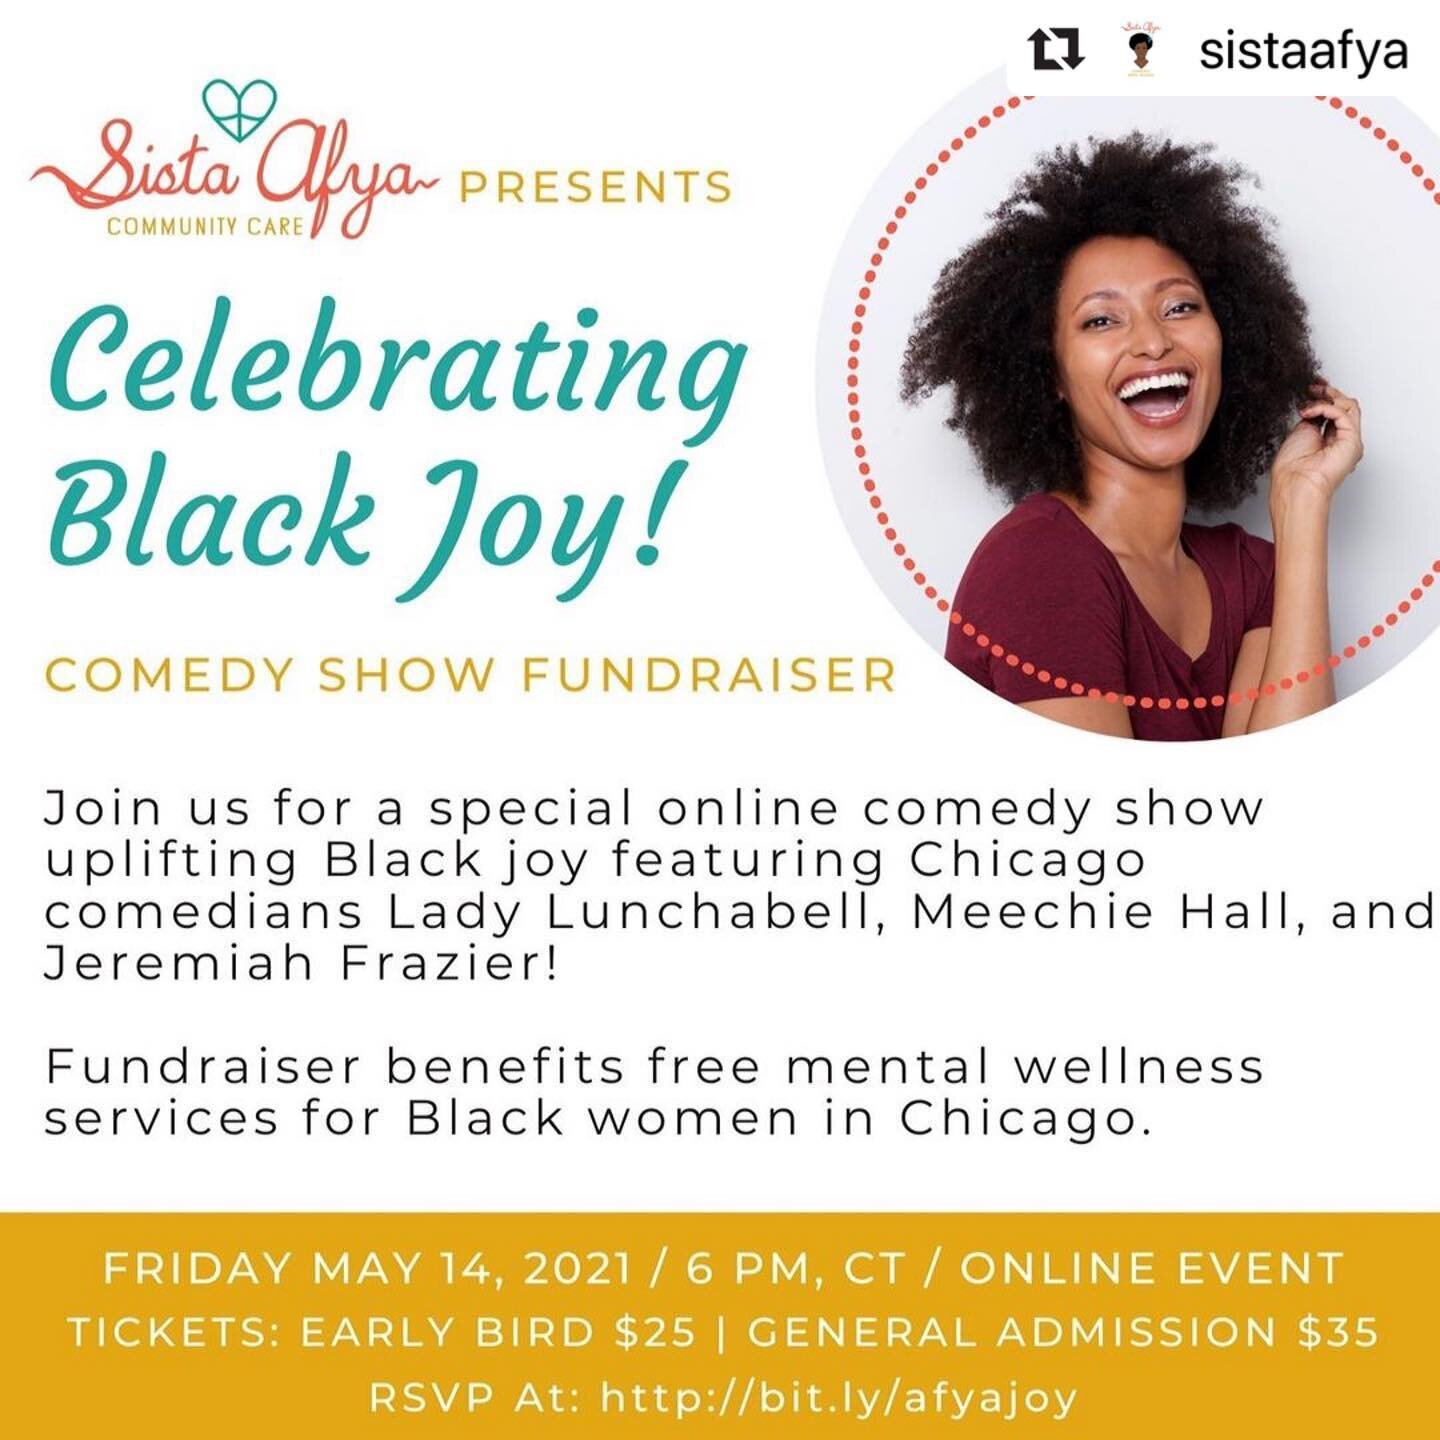 Great event from @sistaafya benefitting free mental wellness for Black women in Chicago. Check it out!
・・・
‼️ Early Bird Tickets ($25) End Next Week ‼️ Don't Delay, RSVP Today ‼️⁠
⁠
Join us for a special online comedy show uplifting Black joy featuri